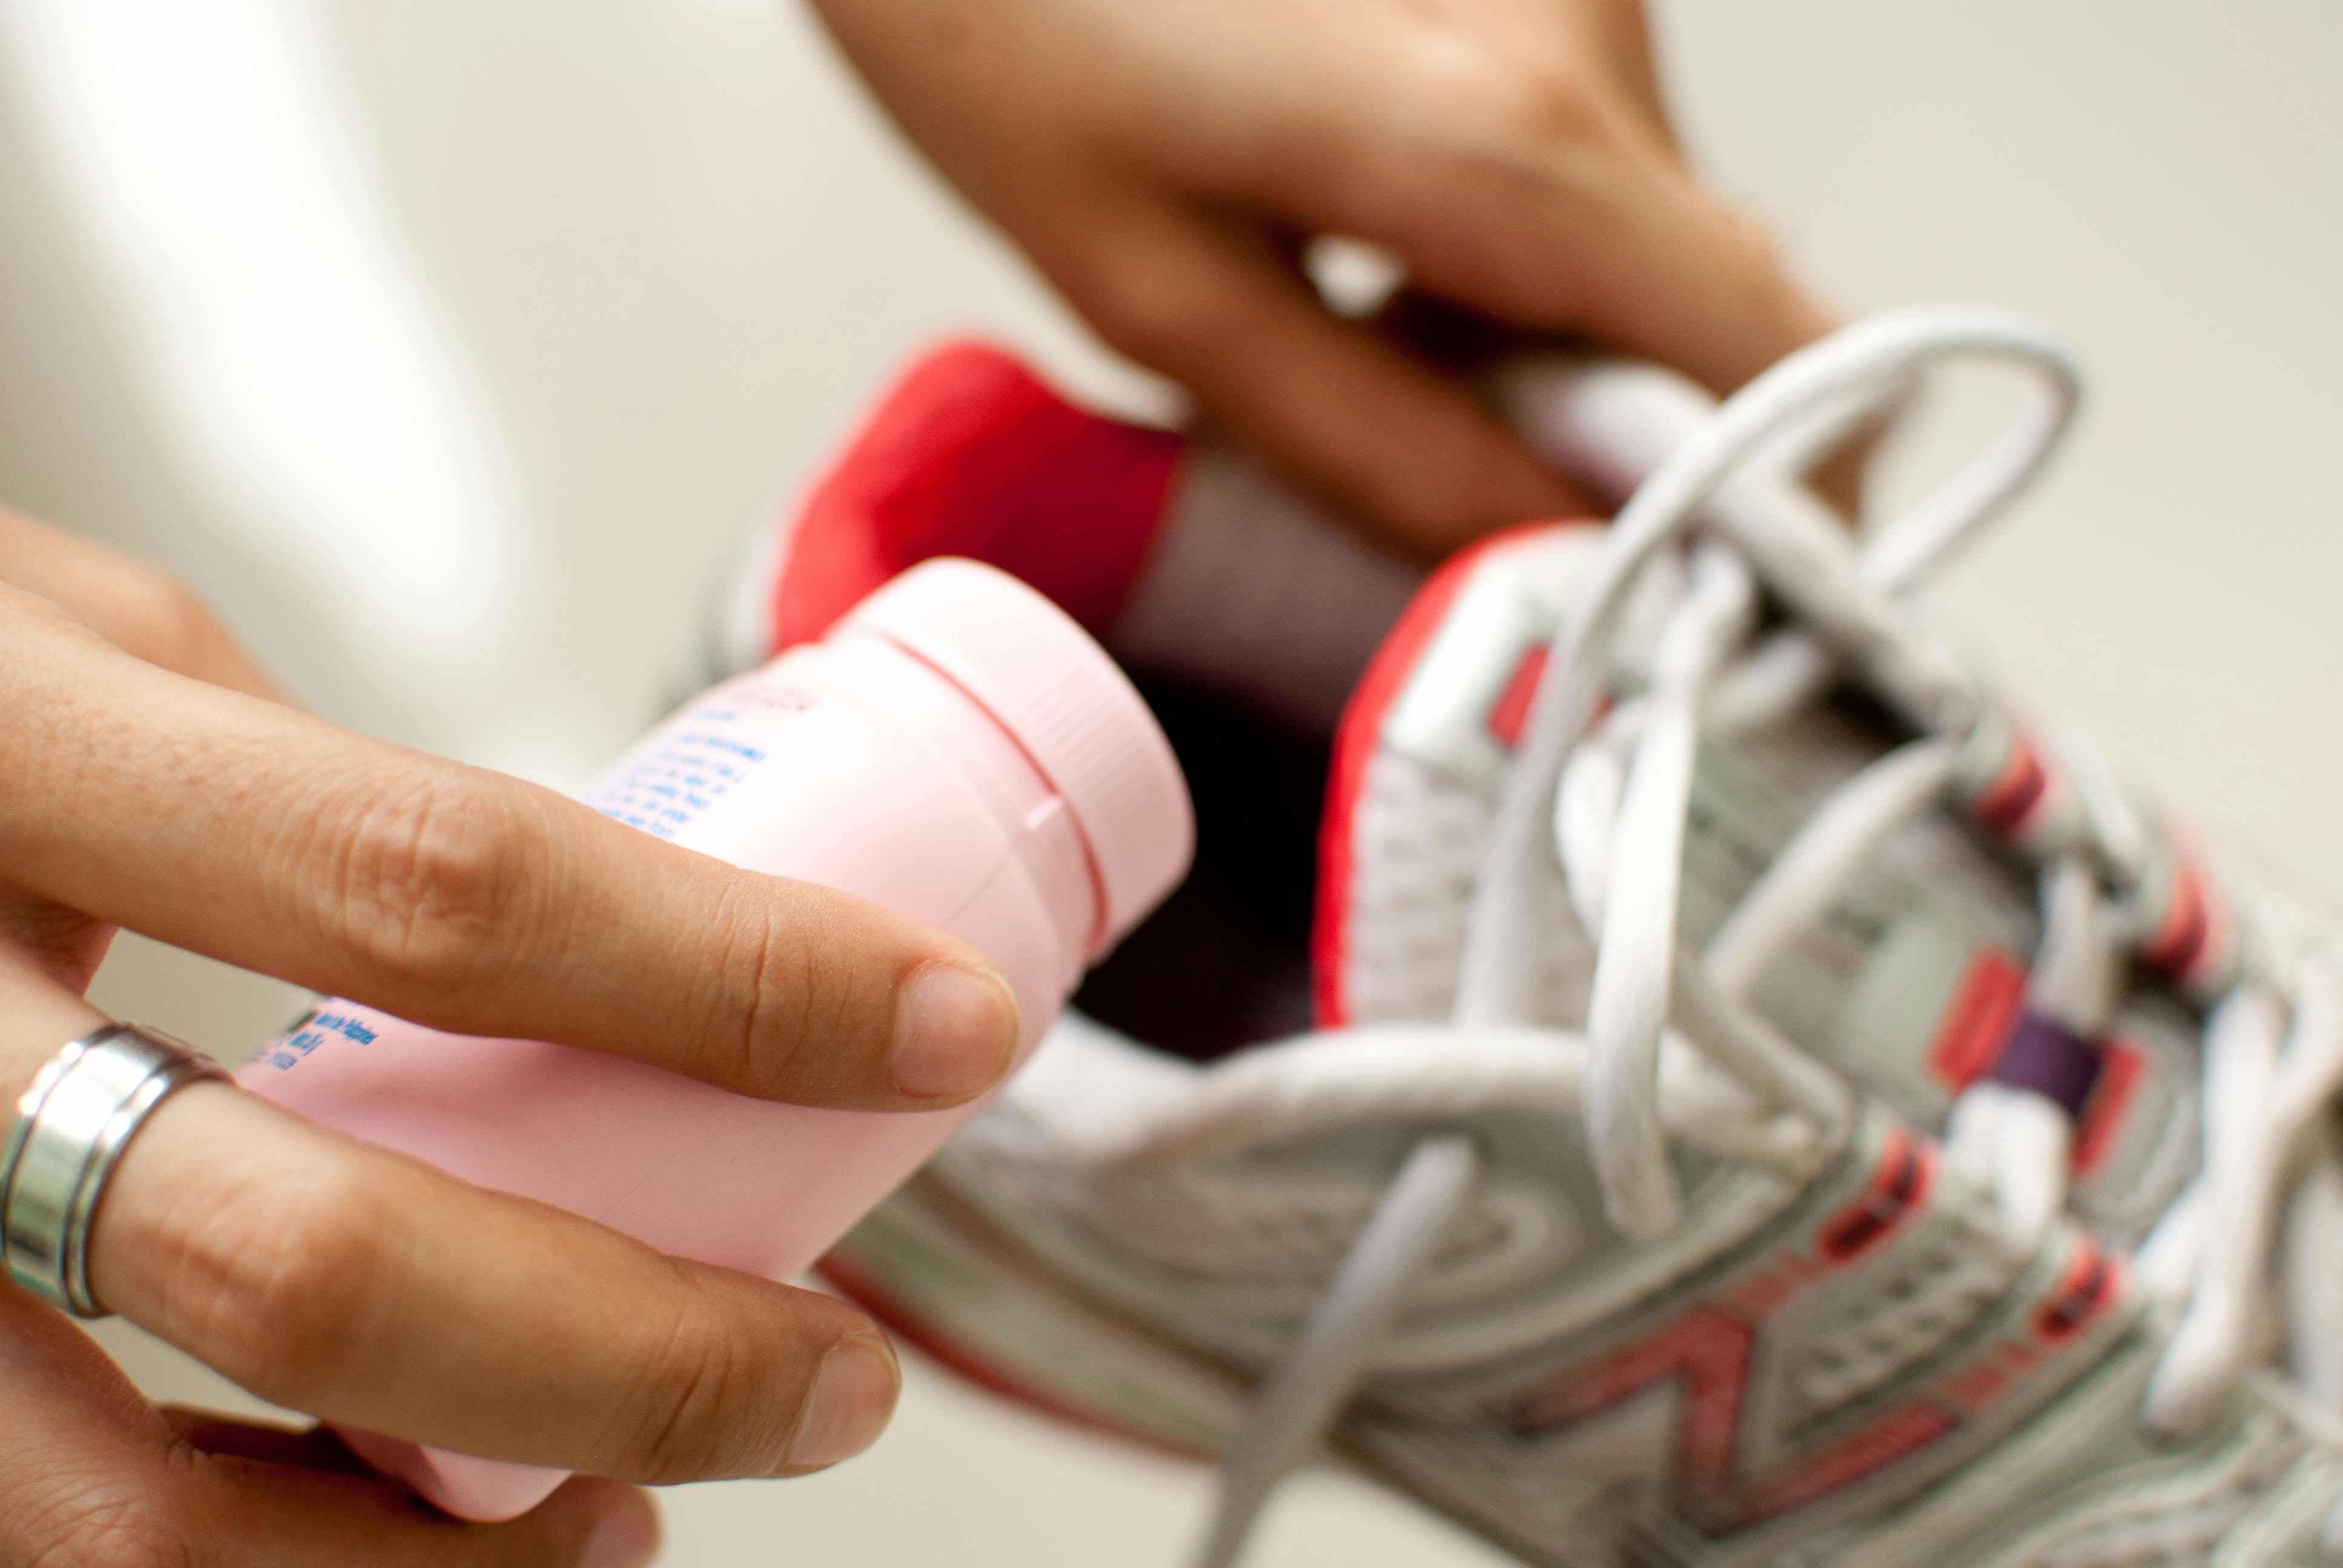 Fill your stinky gym shoes with baby powder and let set overnight.